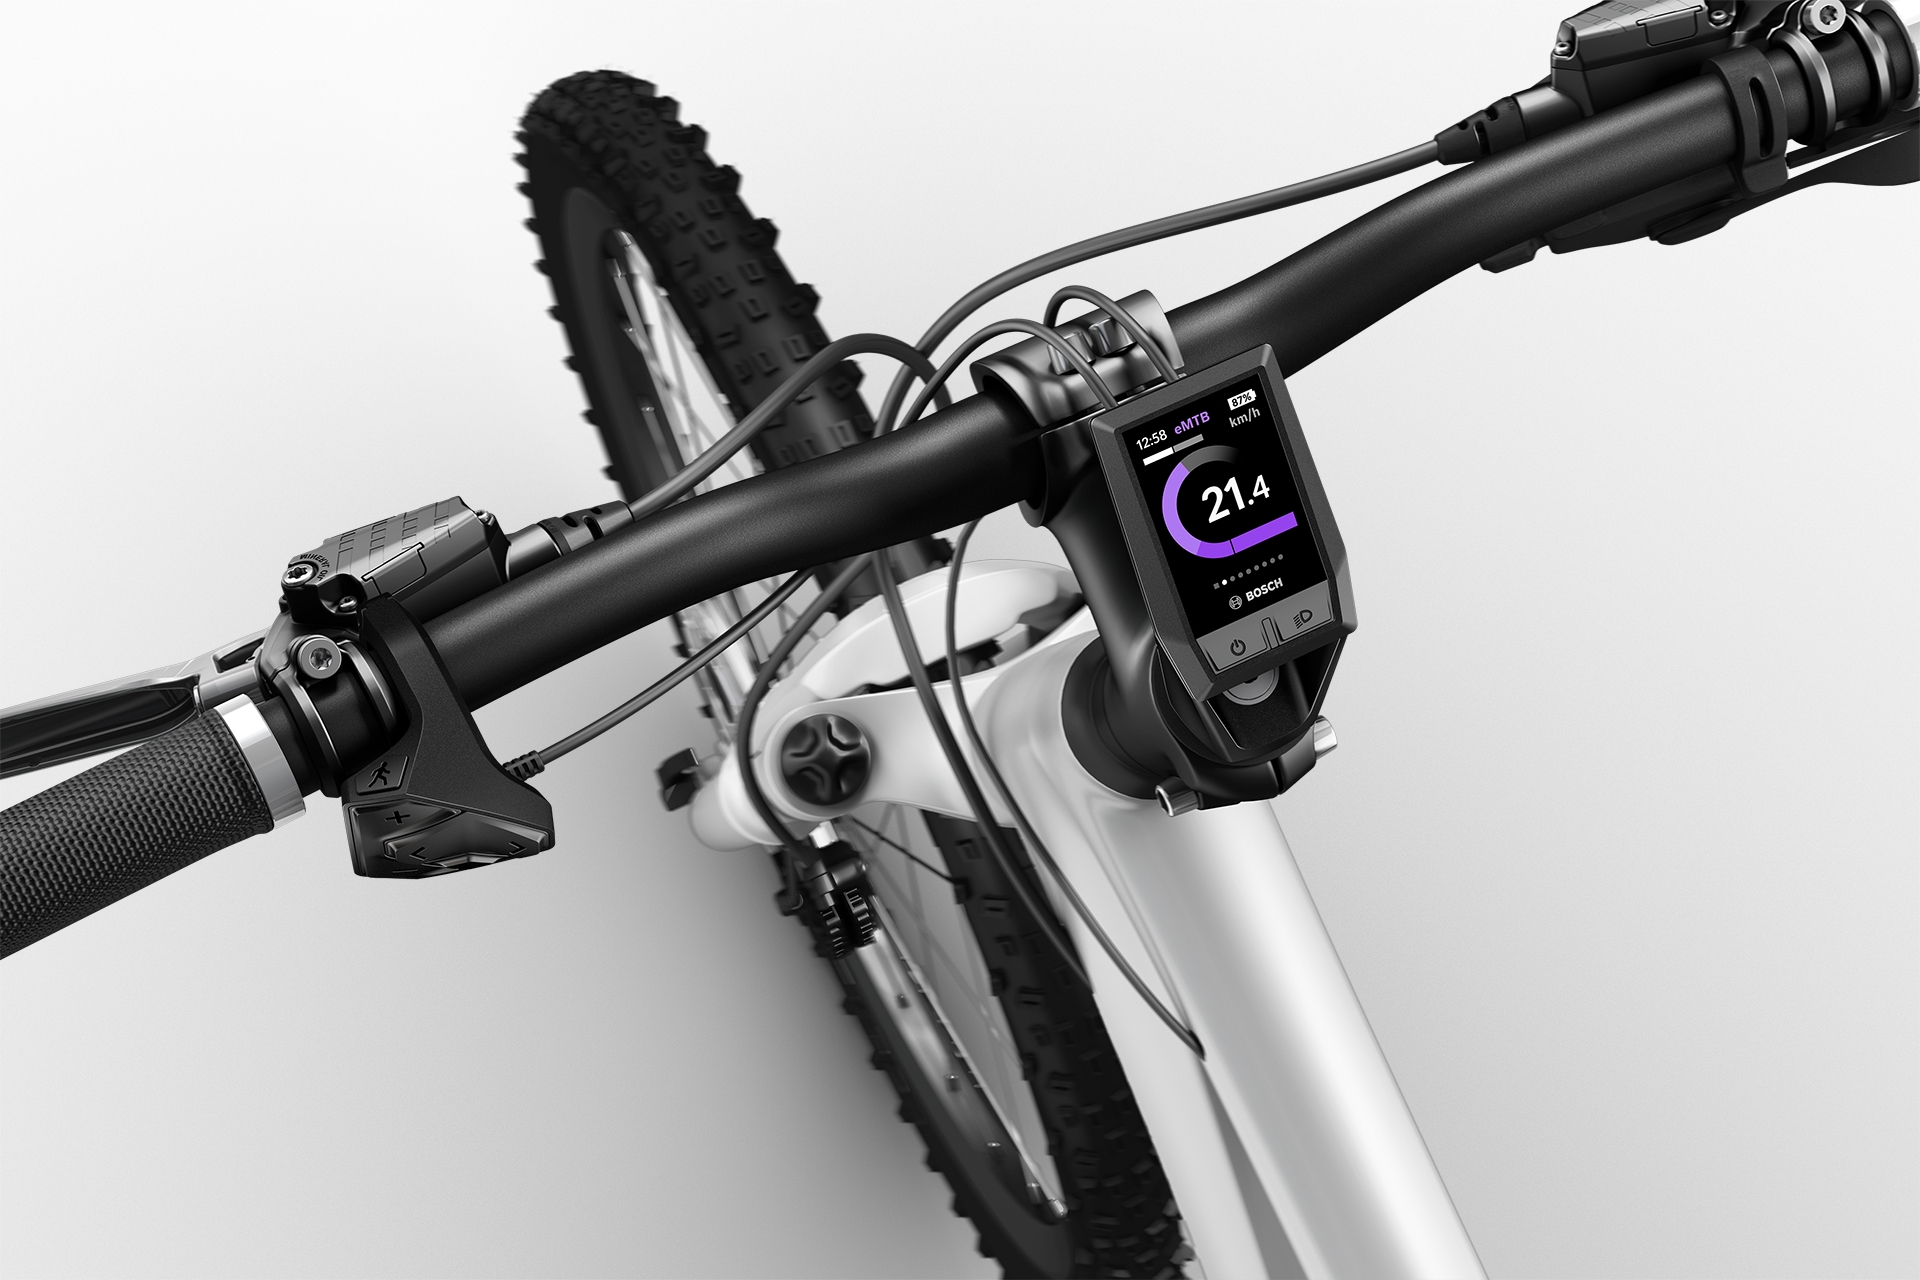 Bosch Kiox display for sporty eBikers launched  electric bike reviews,  buying advice and news - ebiketips